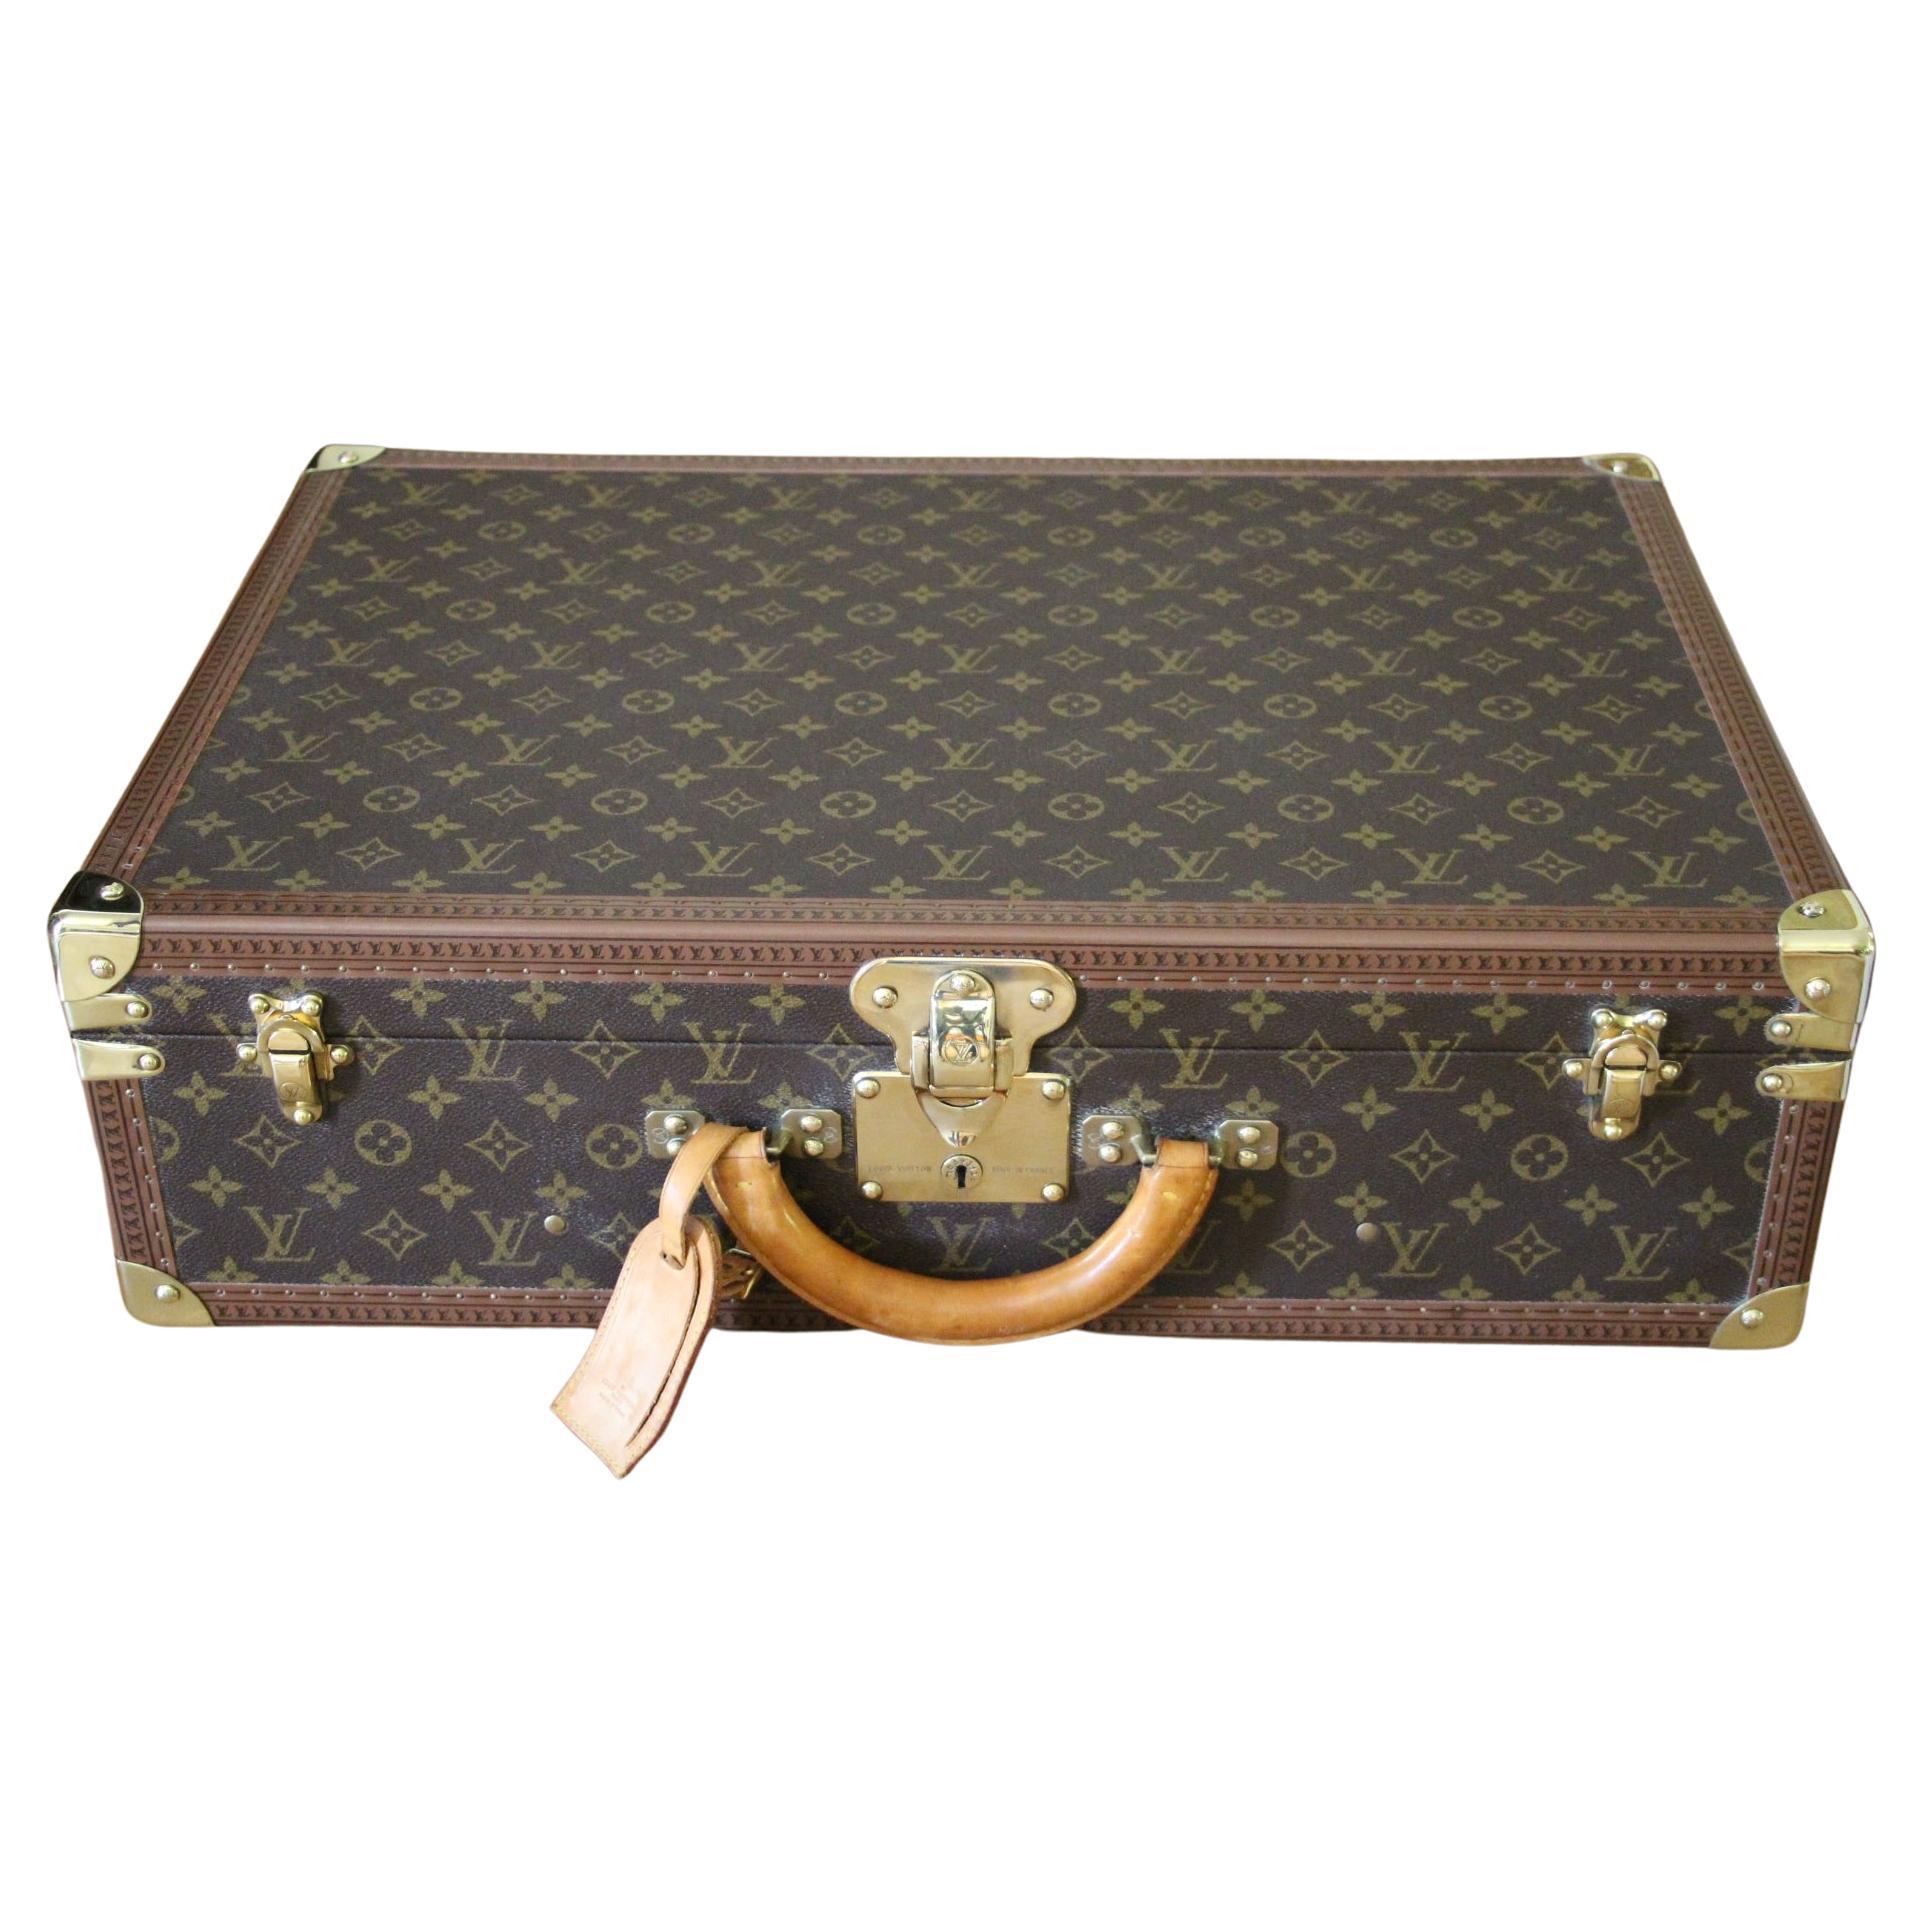 Buy Authentic Pre-owned Louis Vuitton Vintage Monogram Sac Tennis Luggage  Travel Bag No.249 211086 from Japan - Buy authentic Plus exclusive items  from Japan